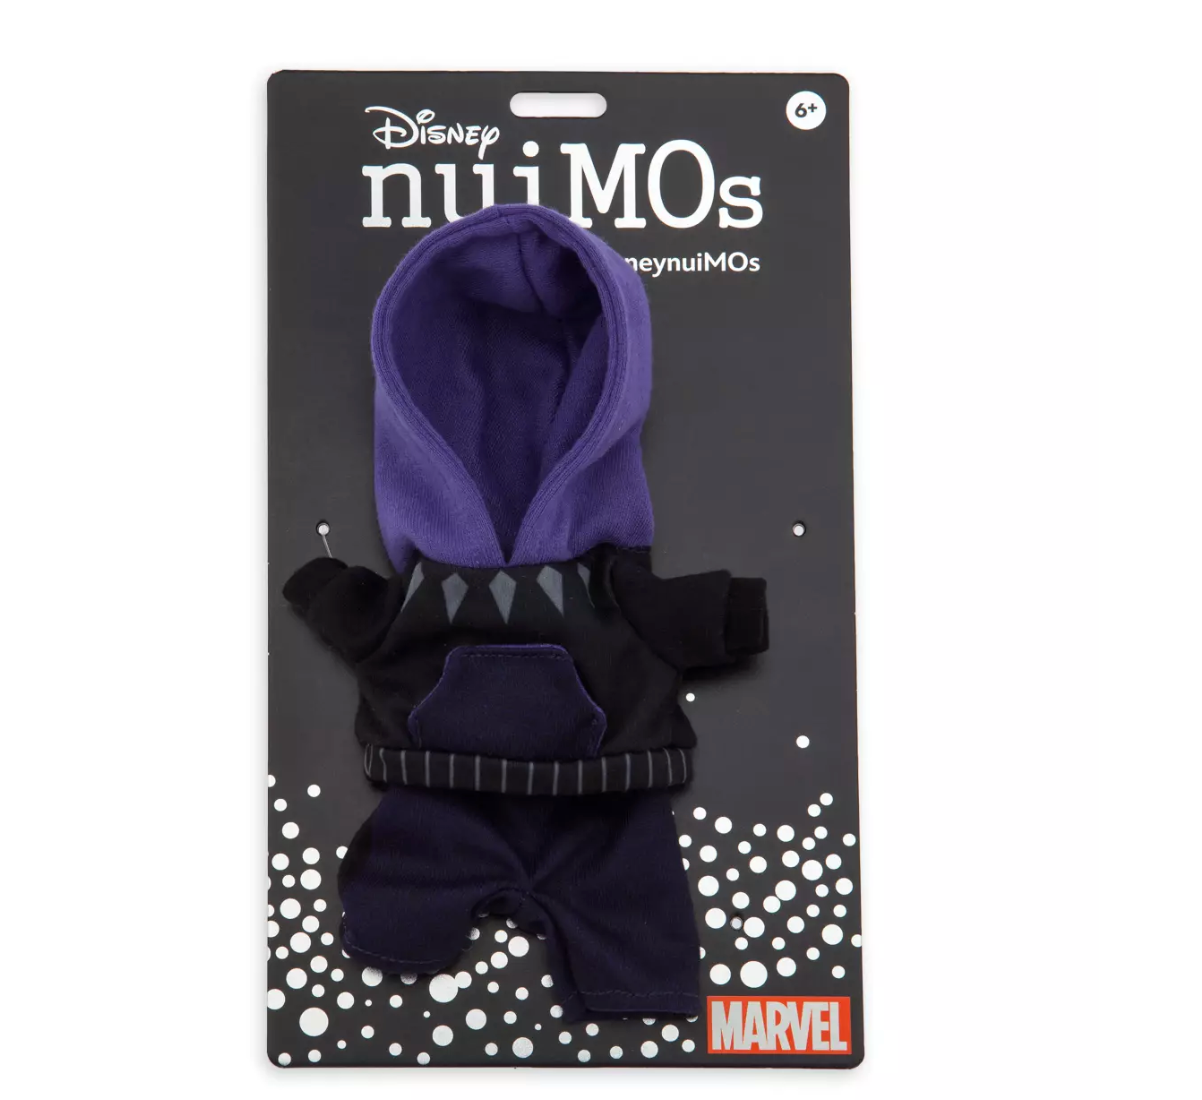 Disney Nuimos Outfit Black Panther Inspired Outfit New with Card